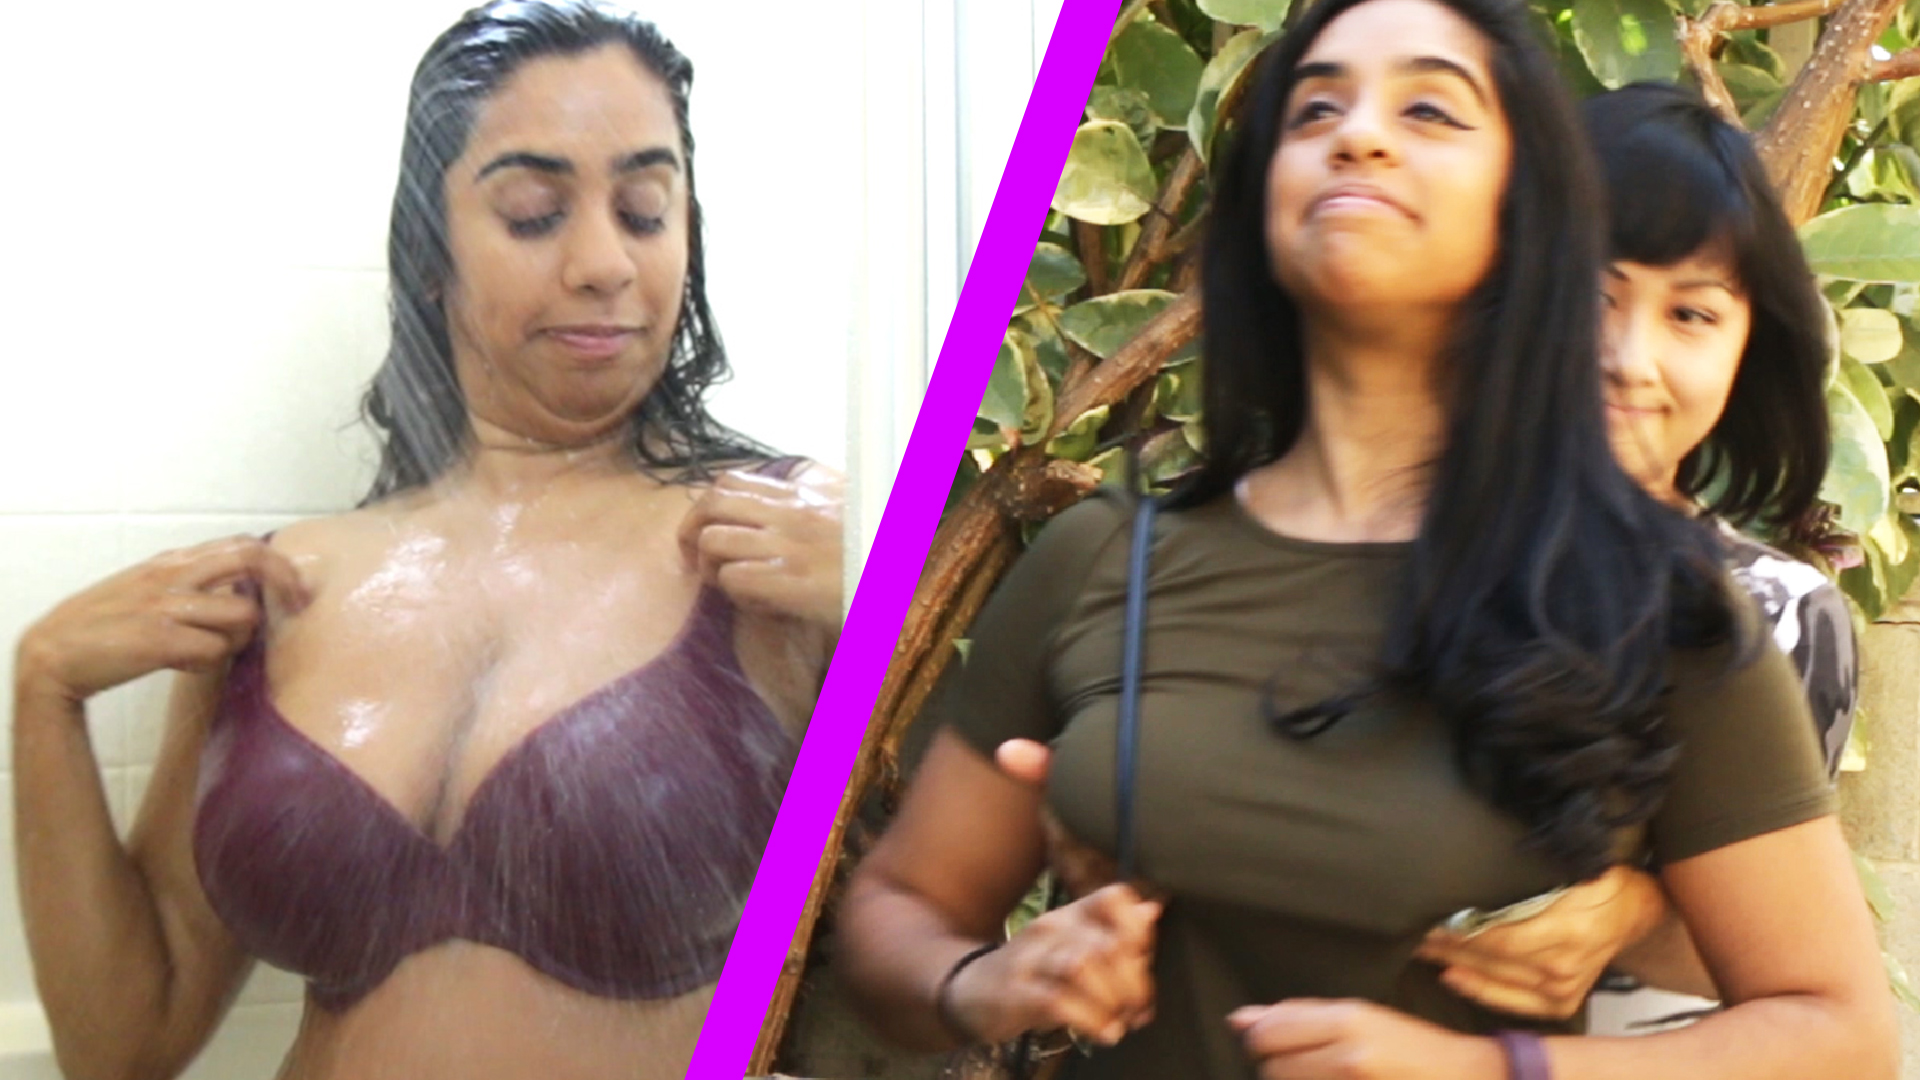 Women With Small Boobs Try The Insta-Famous Bra